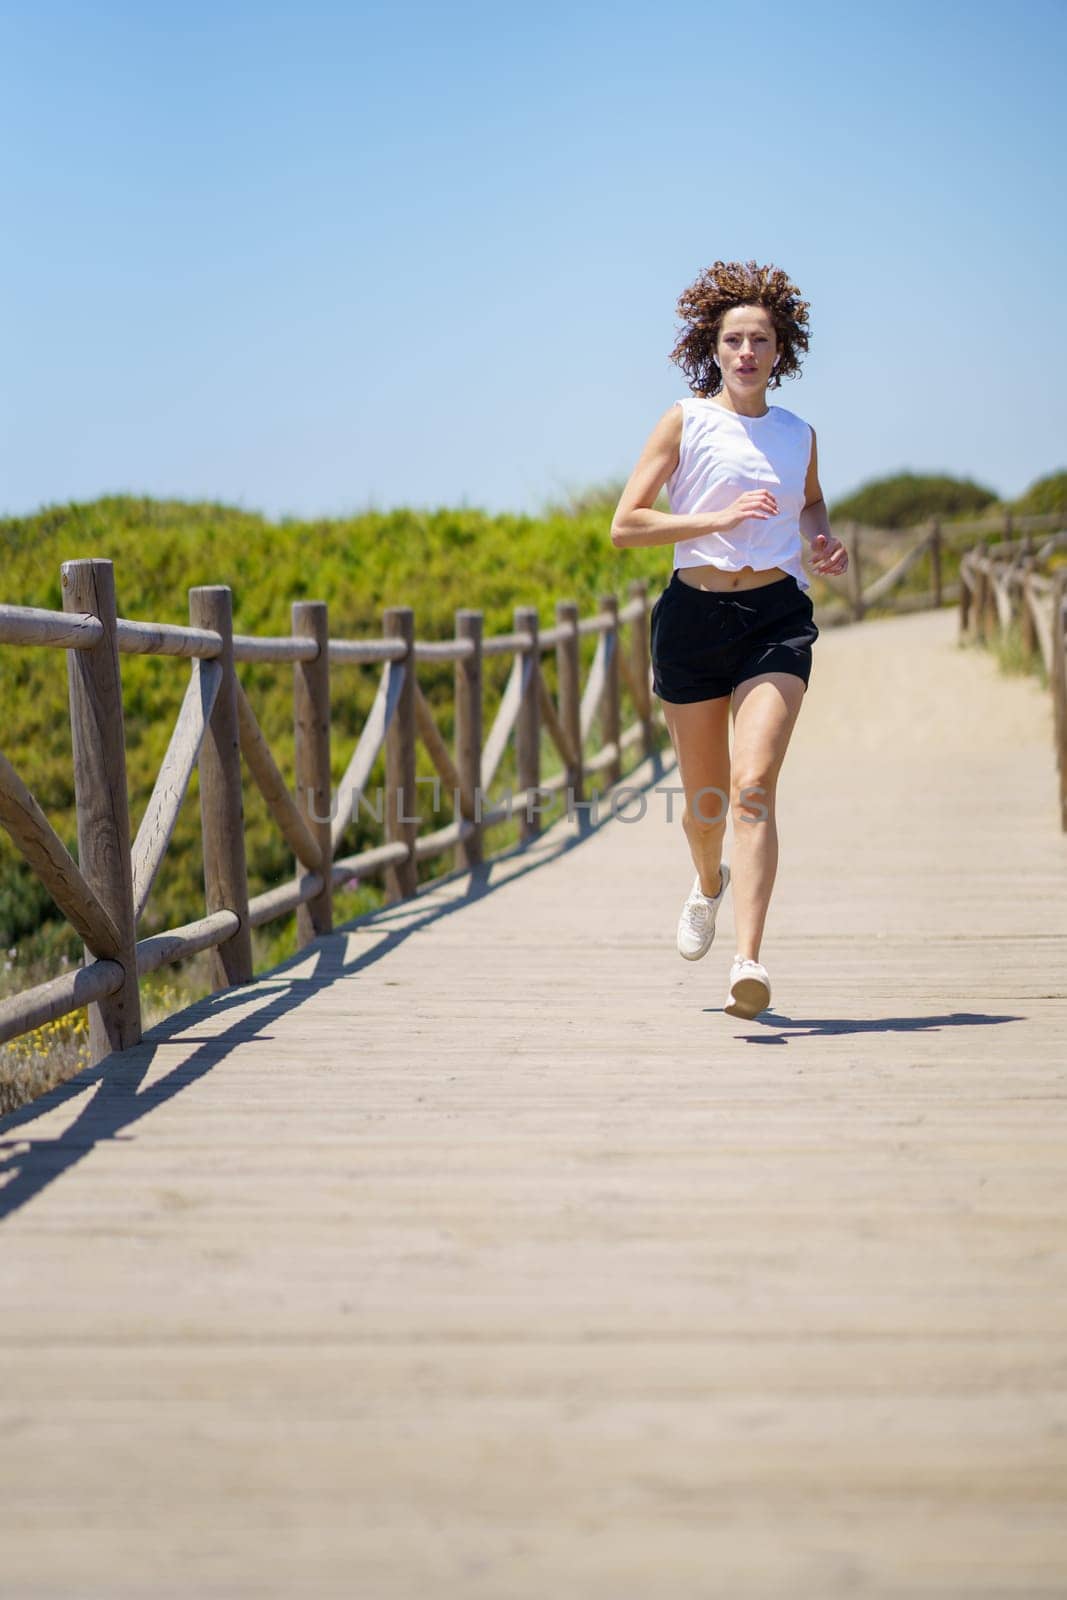 Confident sportswoman jogging on wooden path by javiindy